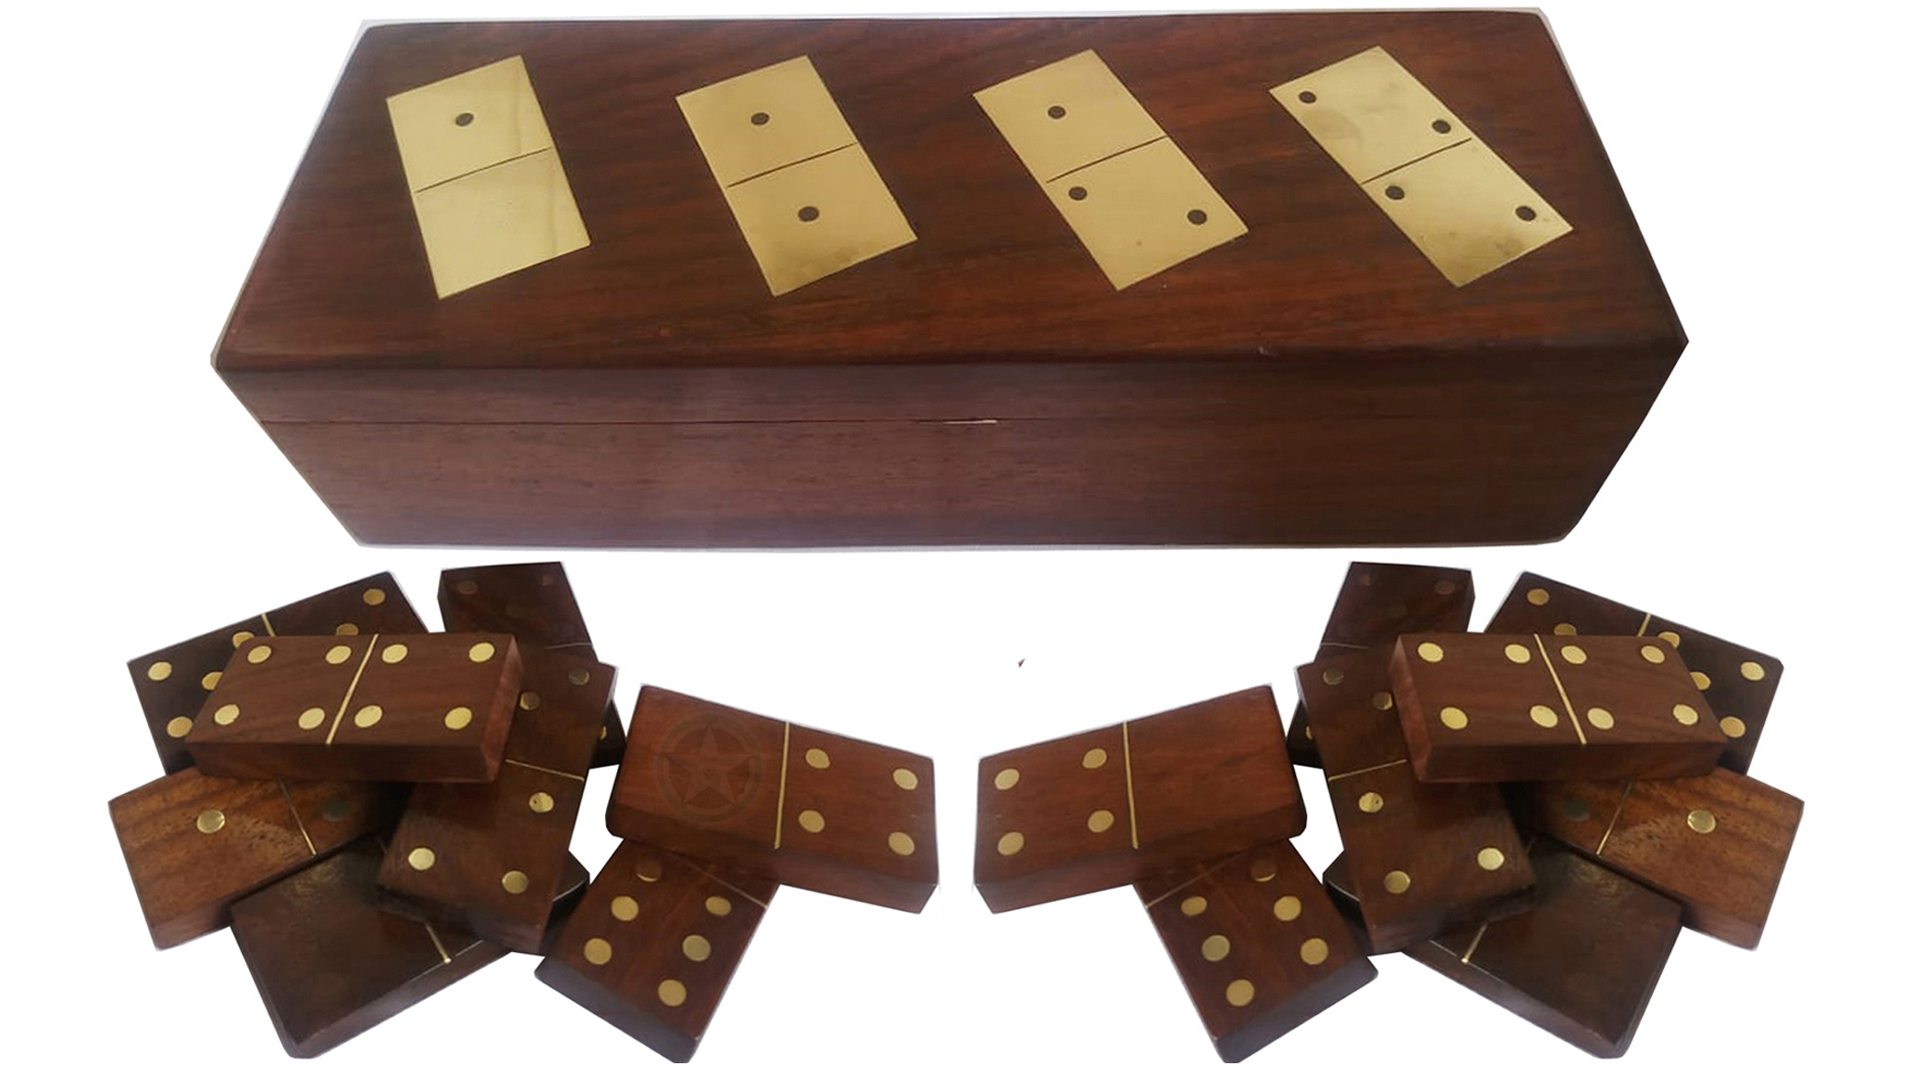 WORLD STAR INDIA Wooden Dominoes game | Dominoes Game Indoor | Outdoor Game | Set 28 Dominoes 3D Game (0+ Years) for Kids & Adults Game Gift Item, Best No-1 Quality Wood Brass Inlay Work Made In India from World Star India